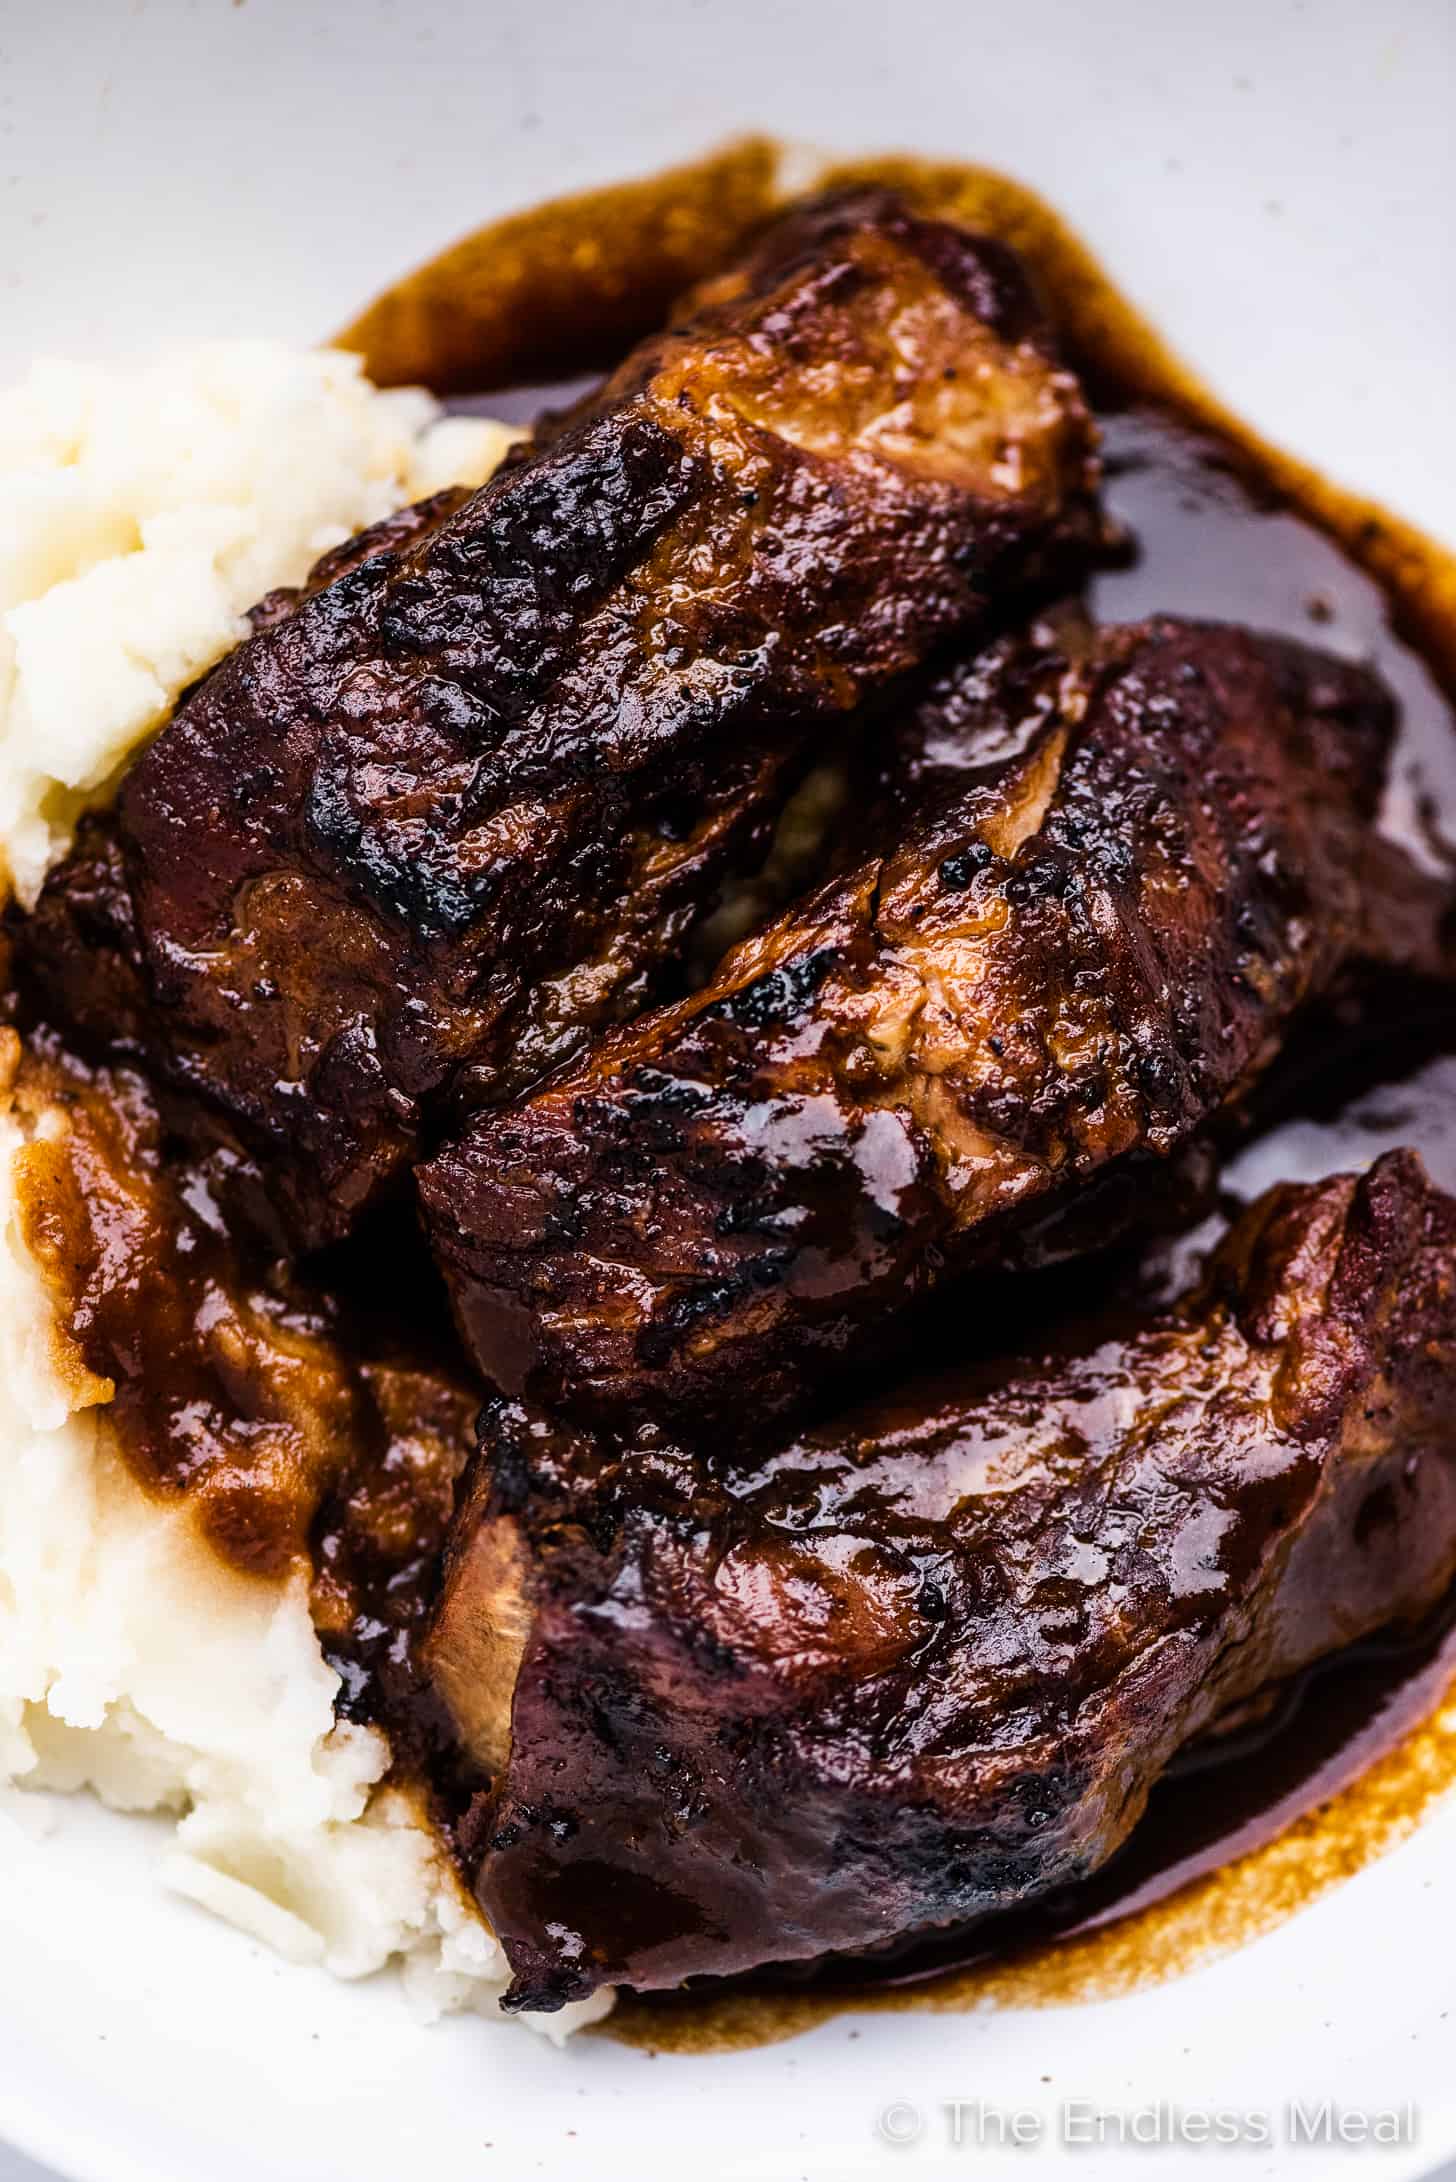 Braised pork ribs on mashed potatoes with gravy.